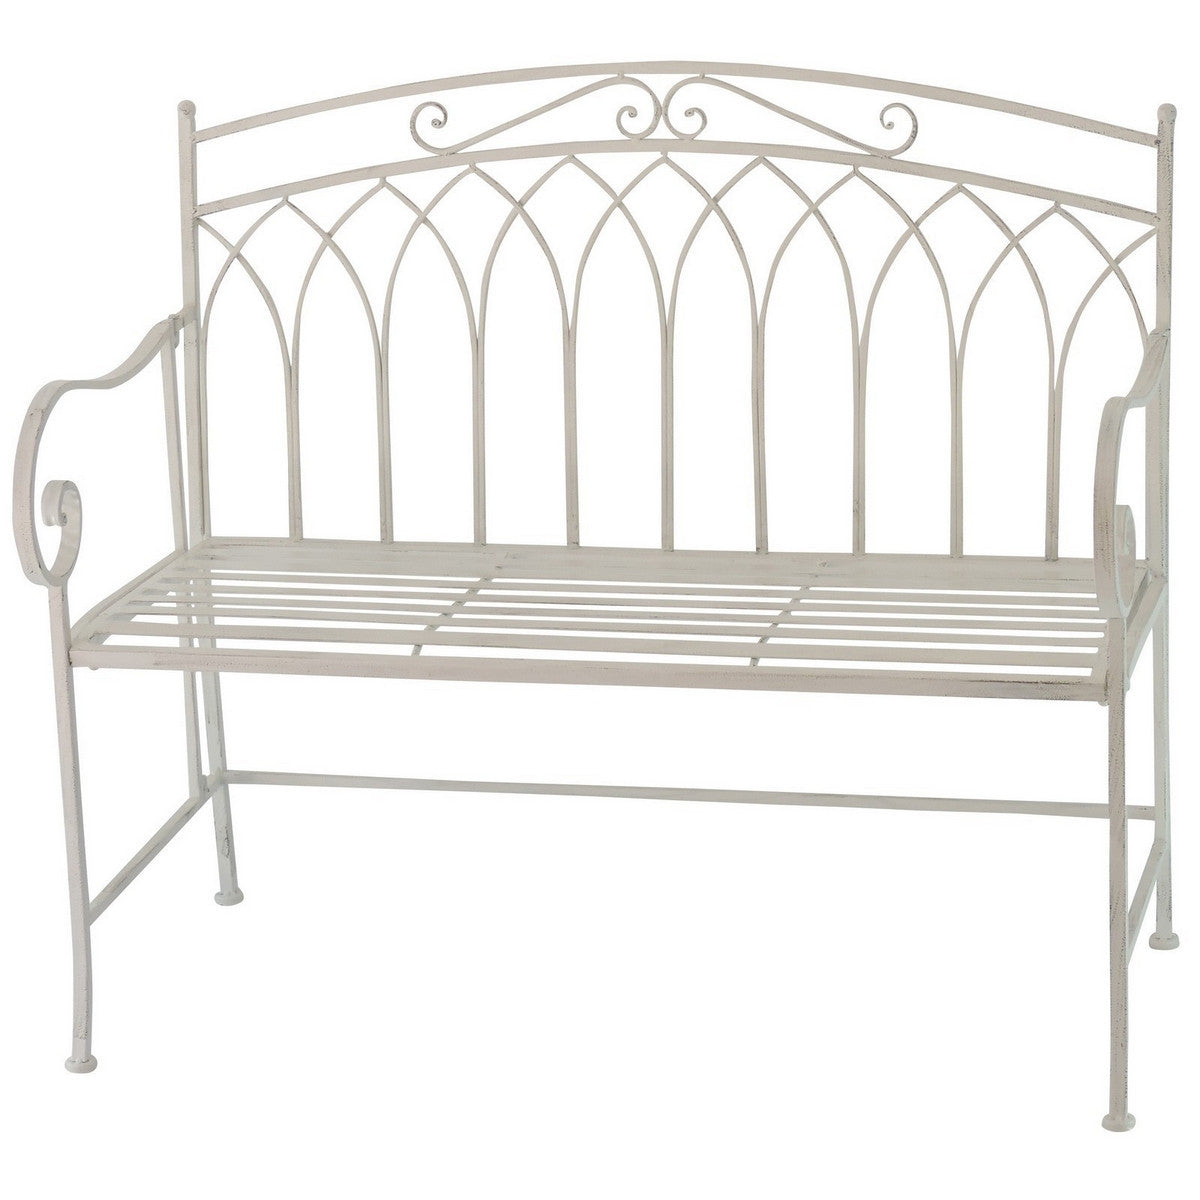 Ornate Charm: The White Metal Love Seat with Timeless Appeal